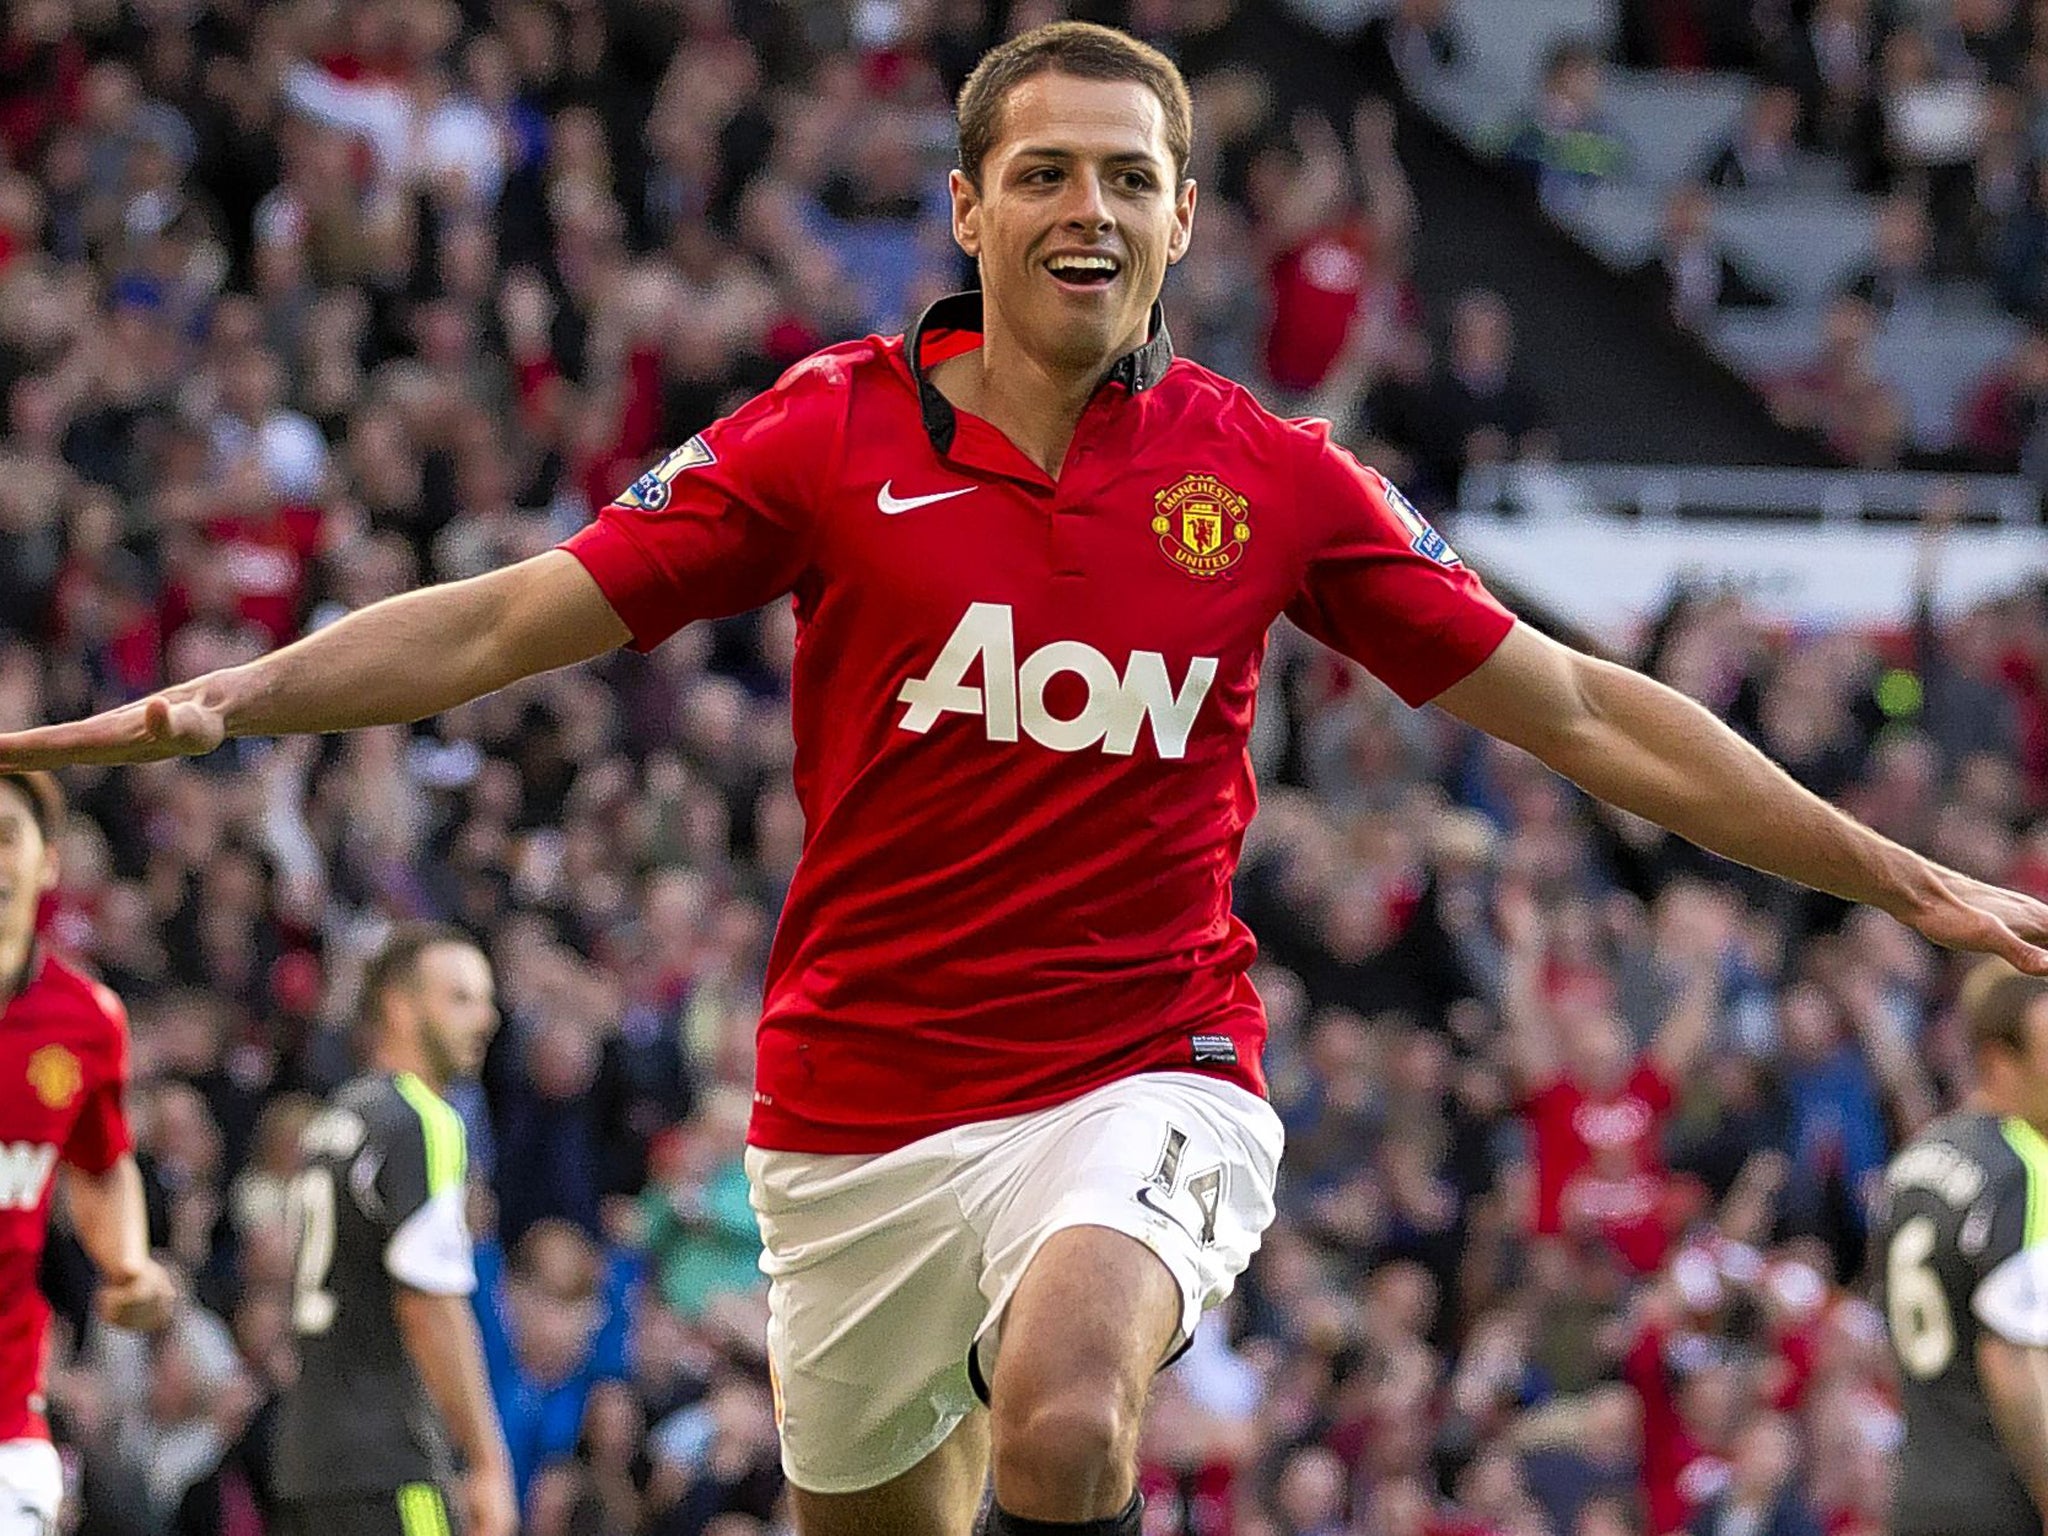 Cleared for take-off: Javier Hernandez scores Manchester United’s late winner against Stoke City yesterday which David Moyes hopes will help kick-start the team’s Premier League season